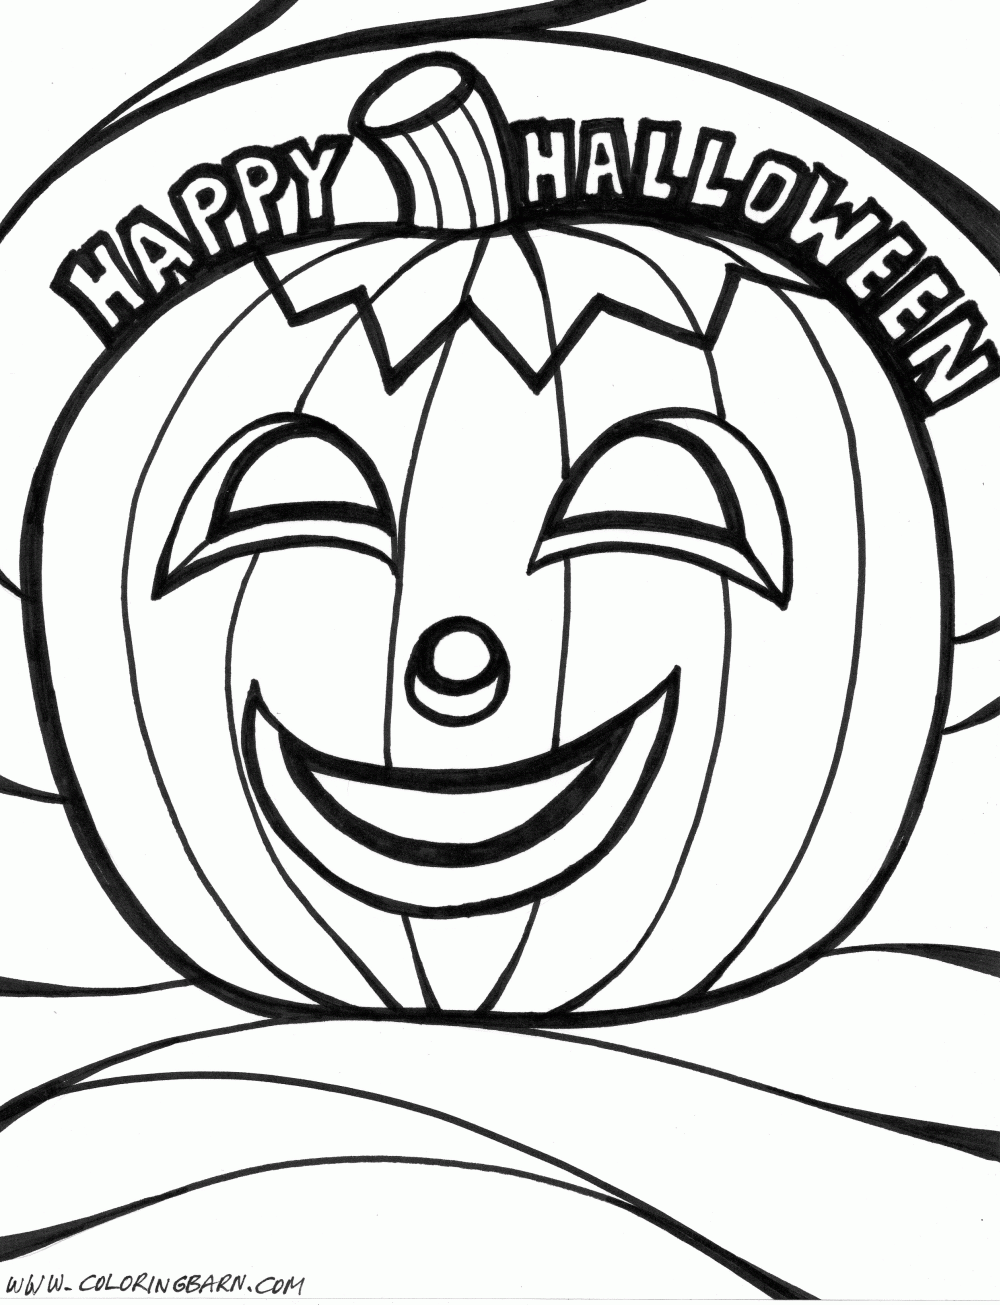 Happy Halloween Coloring Pages | Clipart Panda - Free Clipart Images